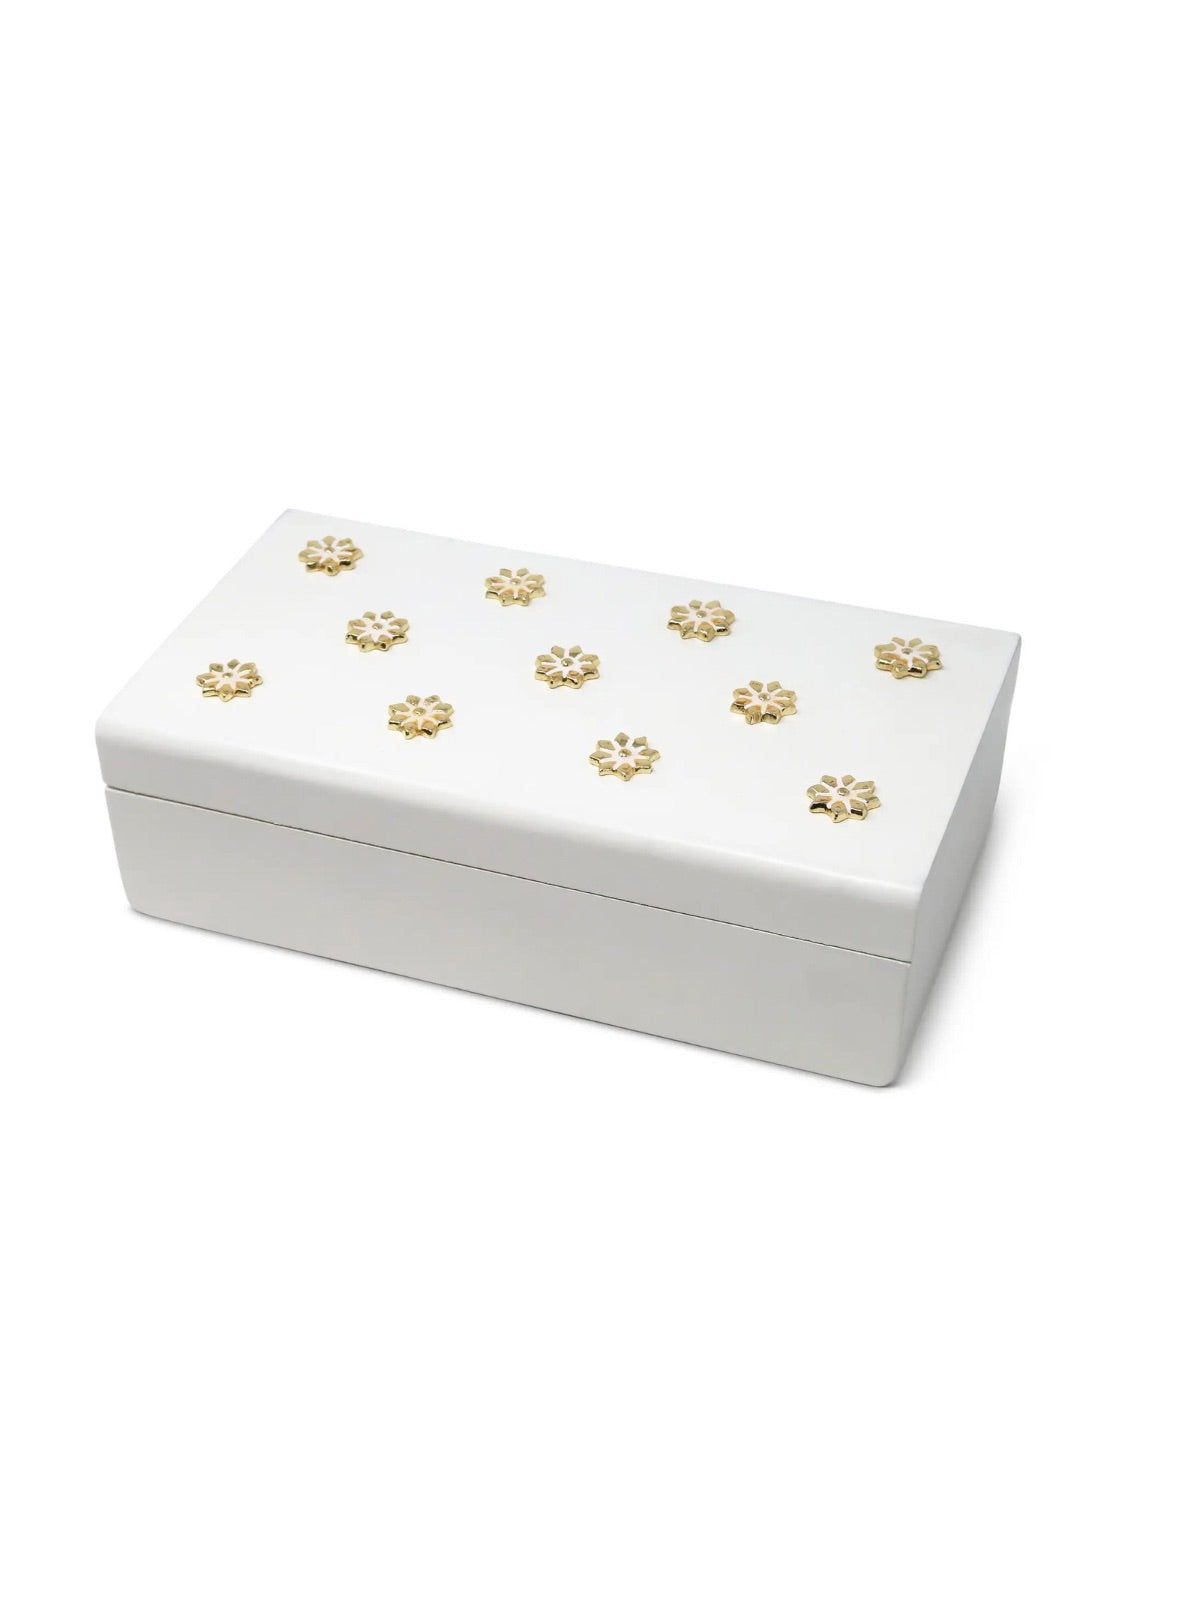 White Decorative Box with Gold Flower Beads Sold by KYA Home Decor.